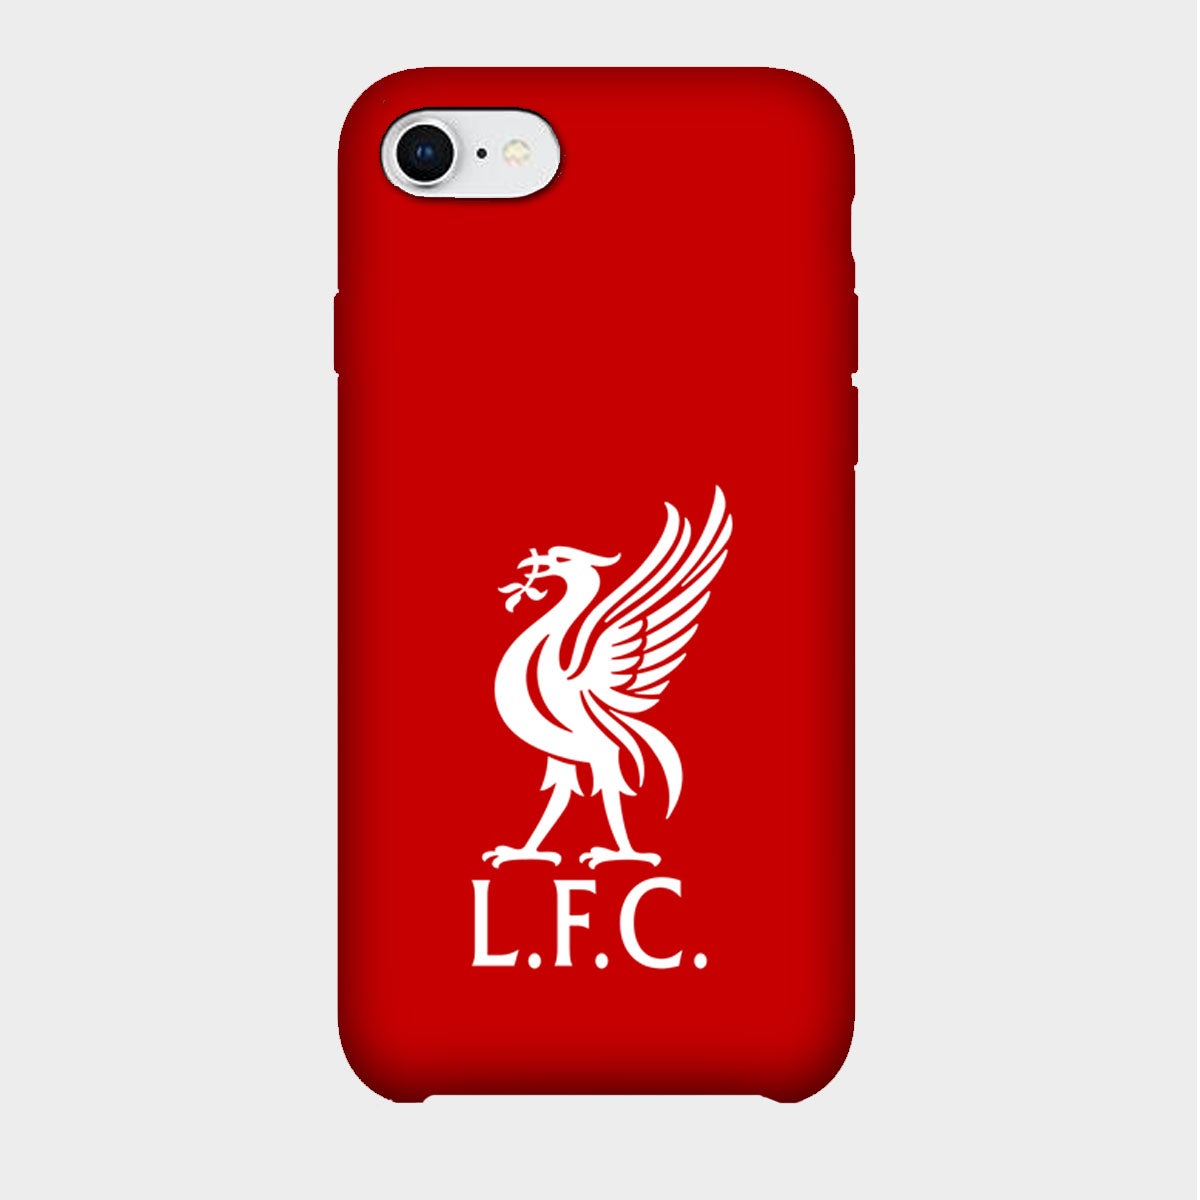 LFC - Liverpool - Mobile Phone Cover - Hard Case